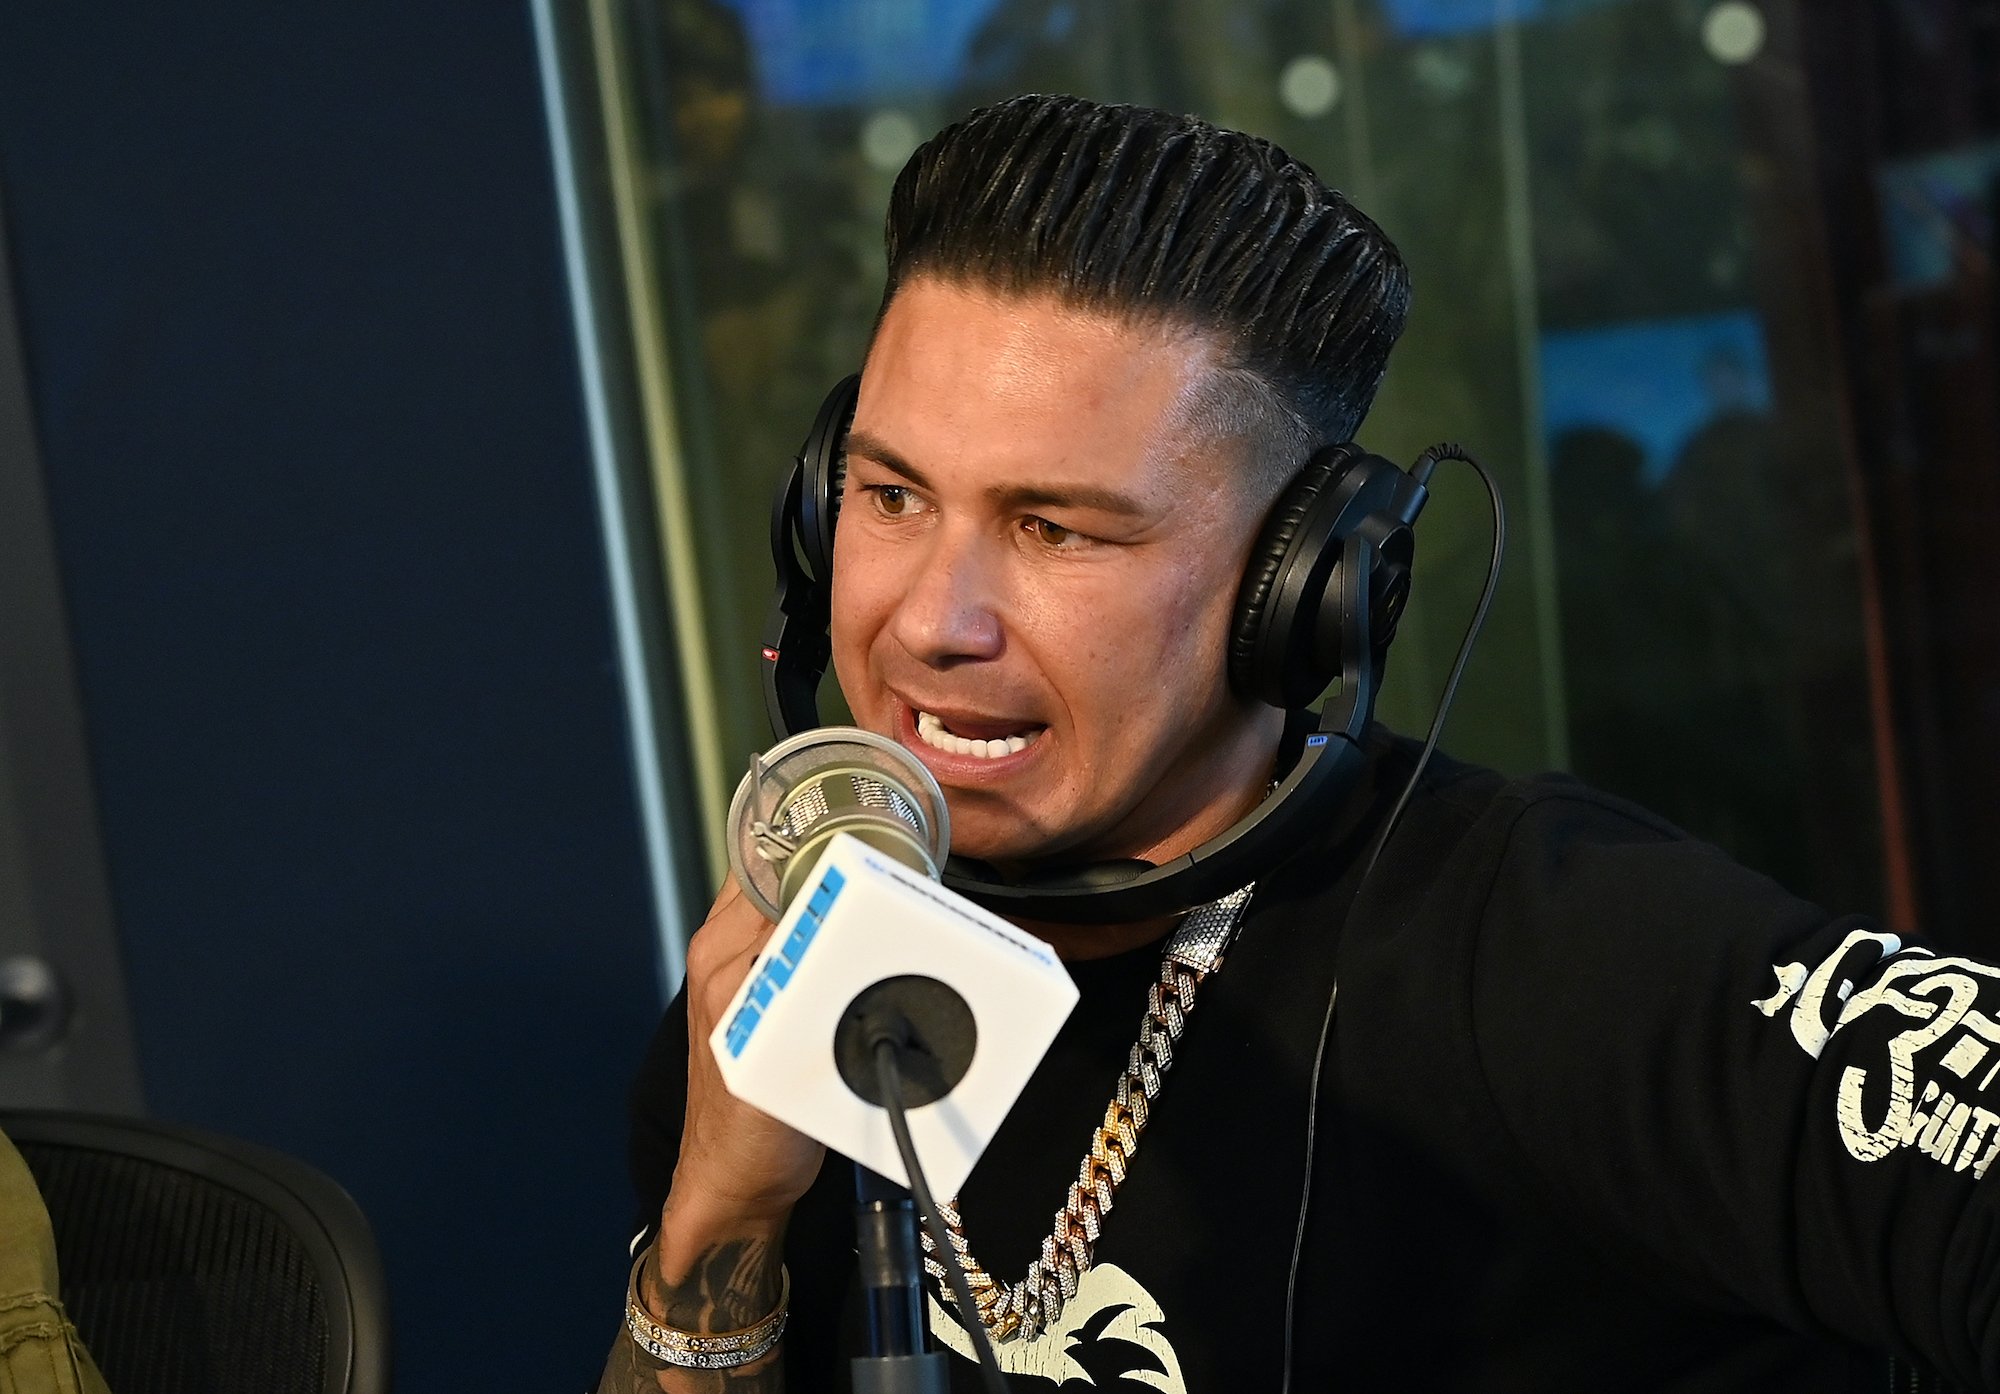 Jersey Shore': How to Style Your Hair Like DJ Pauly DelVecchio